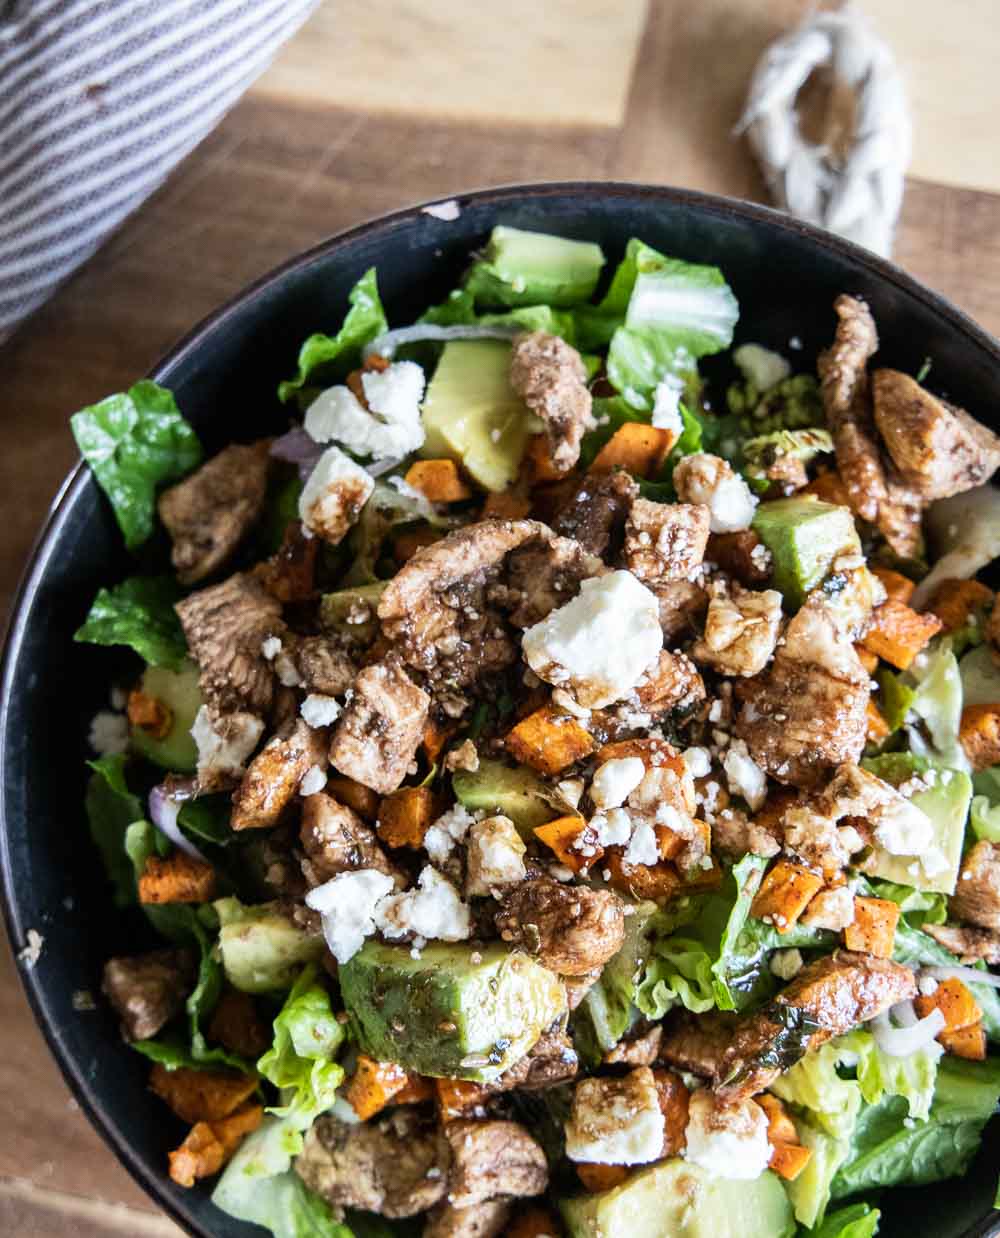 Balsamic Chicken Salad with Roasted Sweet Potatoes, Feta, and Avocado